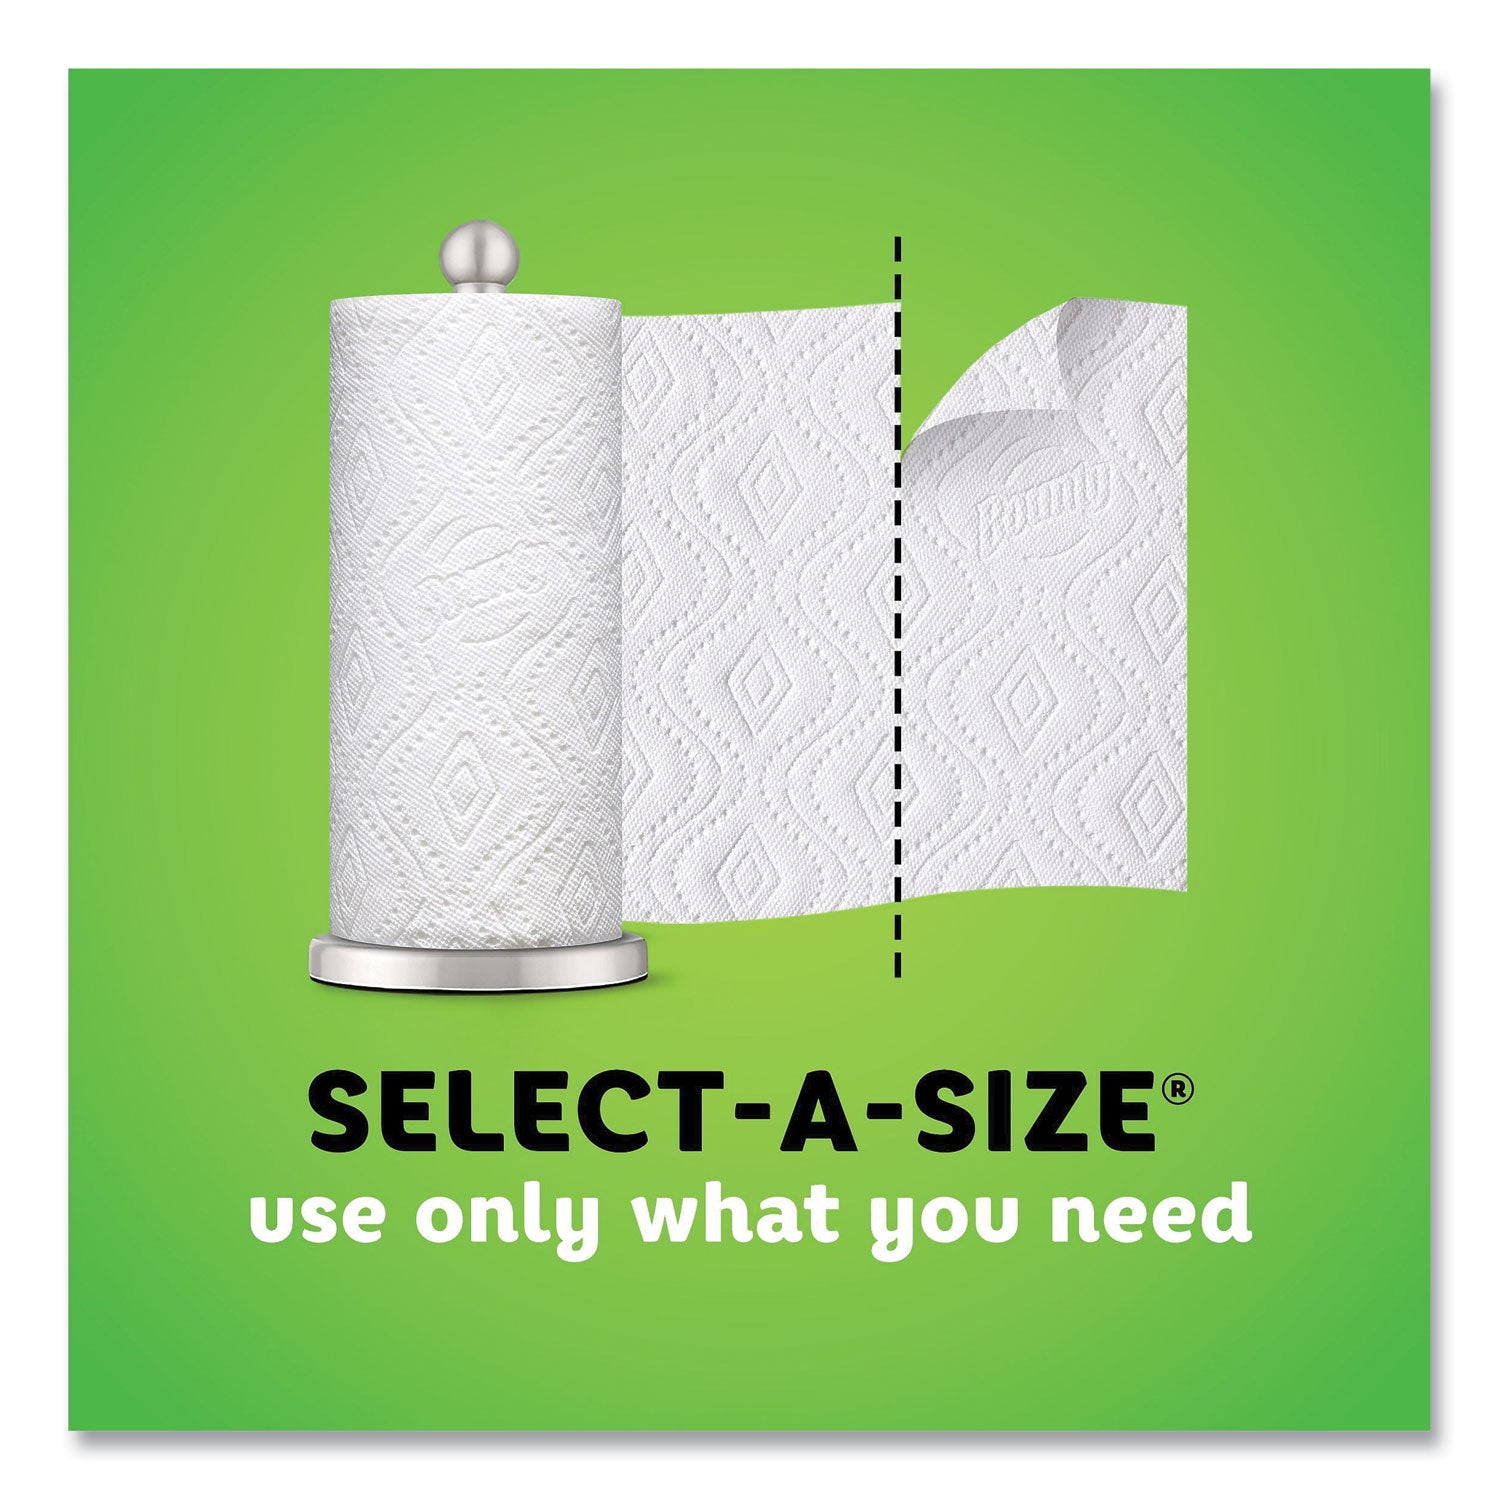 select-a-size-kitchen-roll-paper-towels-2-ply-white-59-x-11-110-sheets-roll-6-rolls-carton_pgc74801 - 4